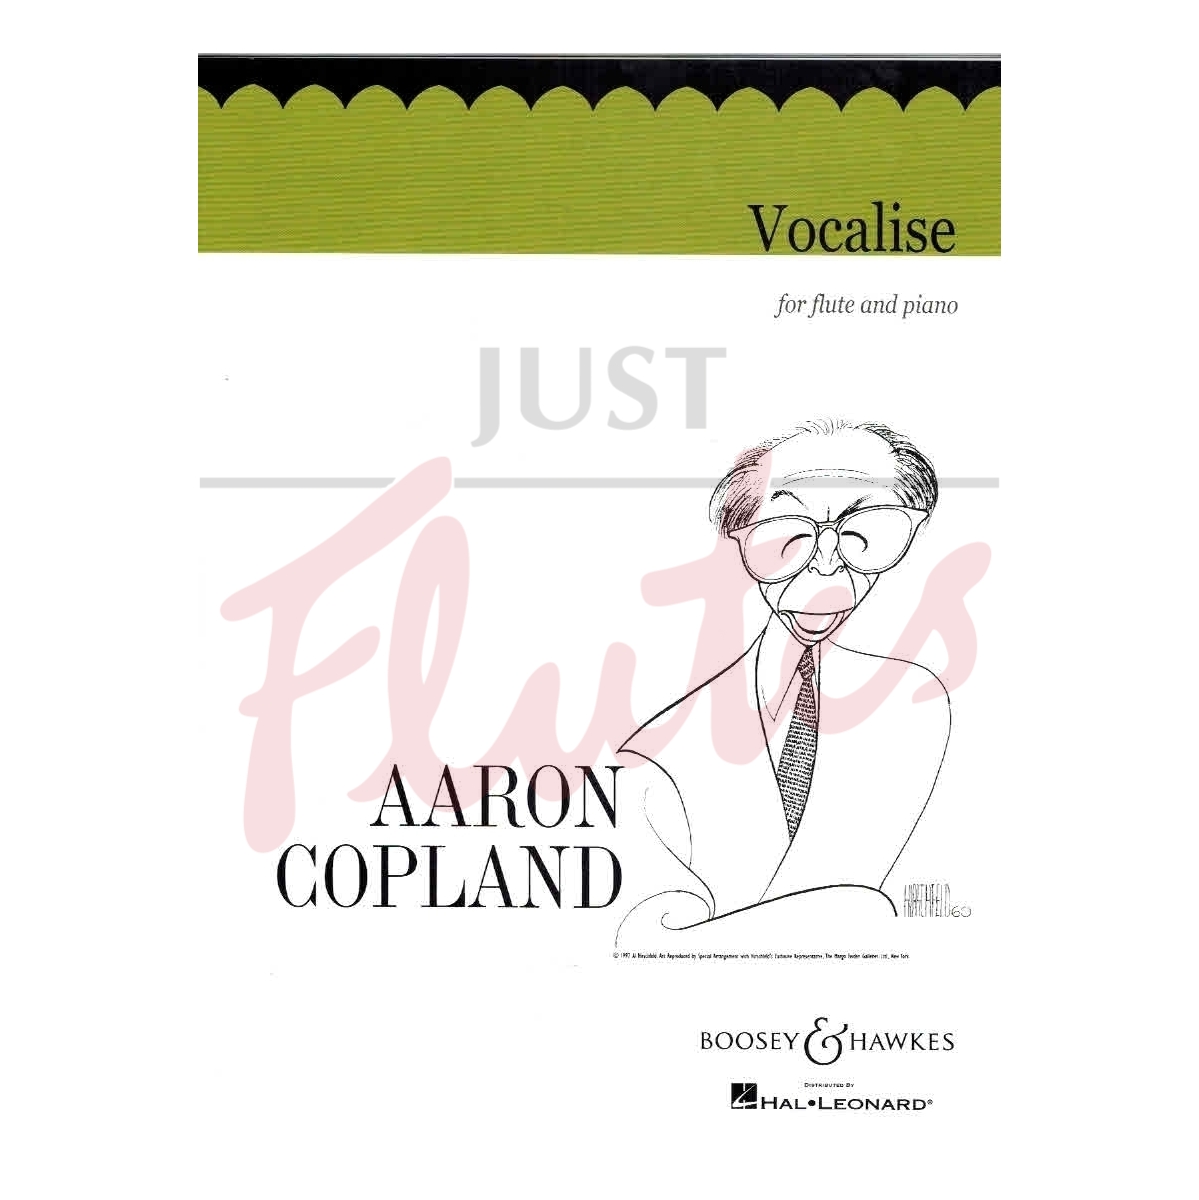 Vocalise for Flute and Piano